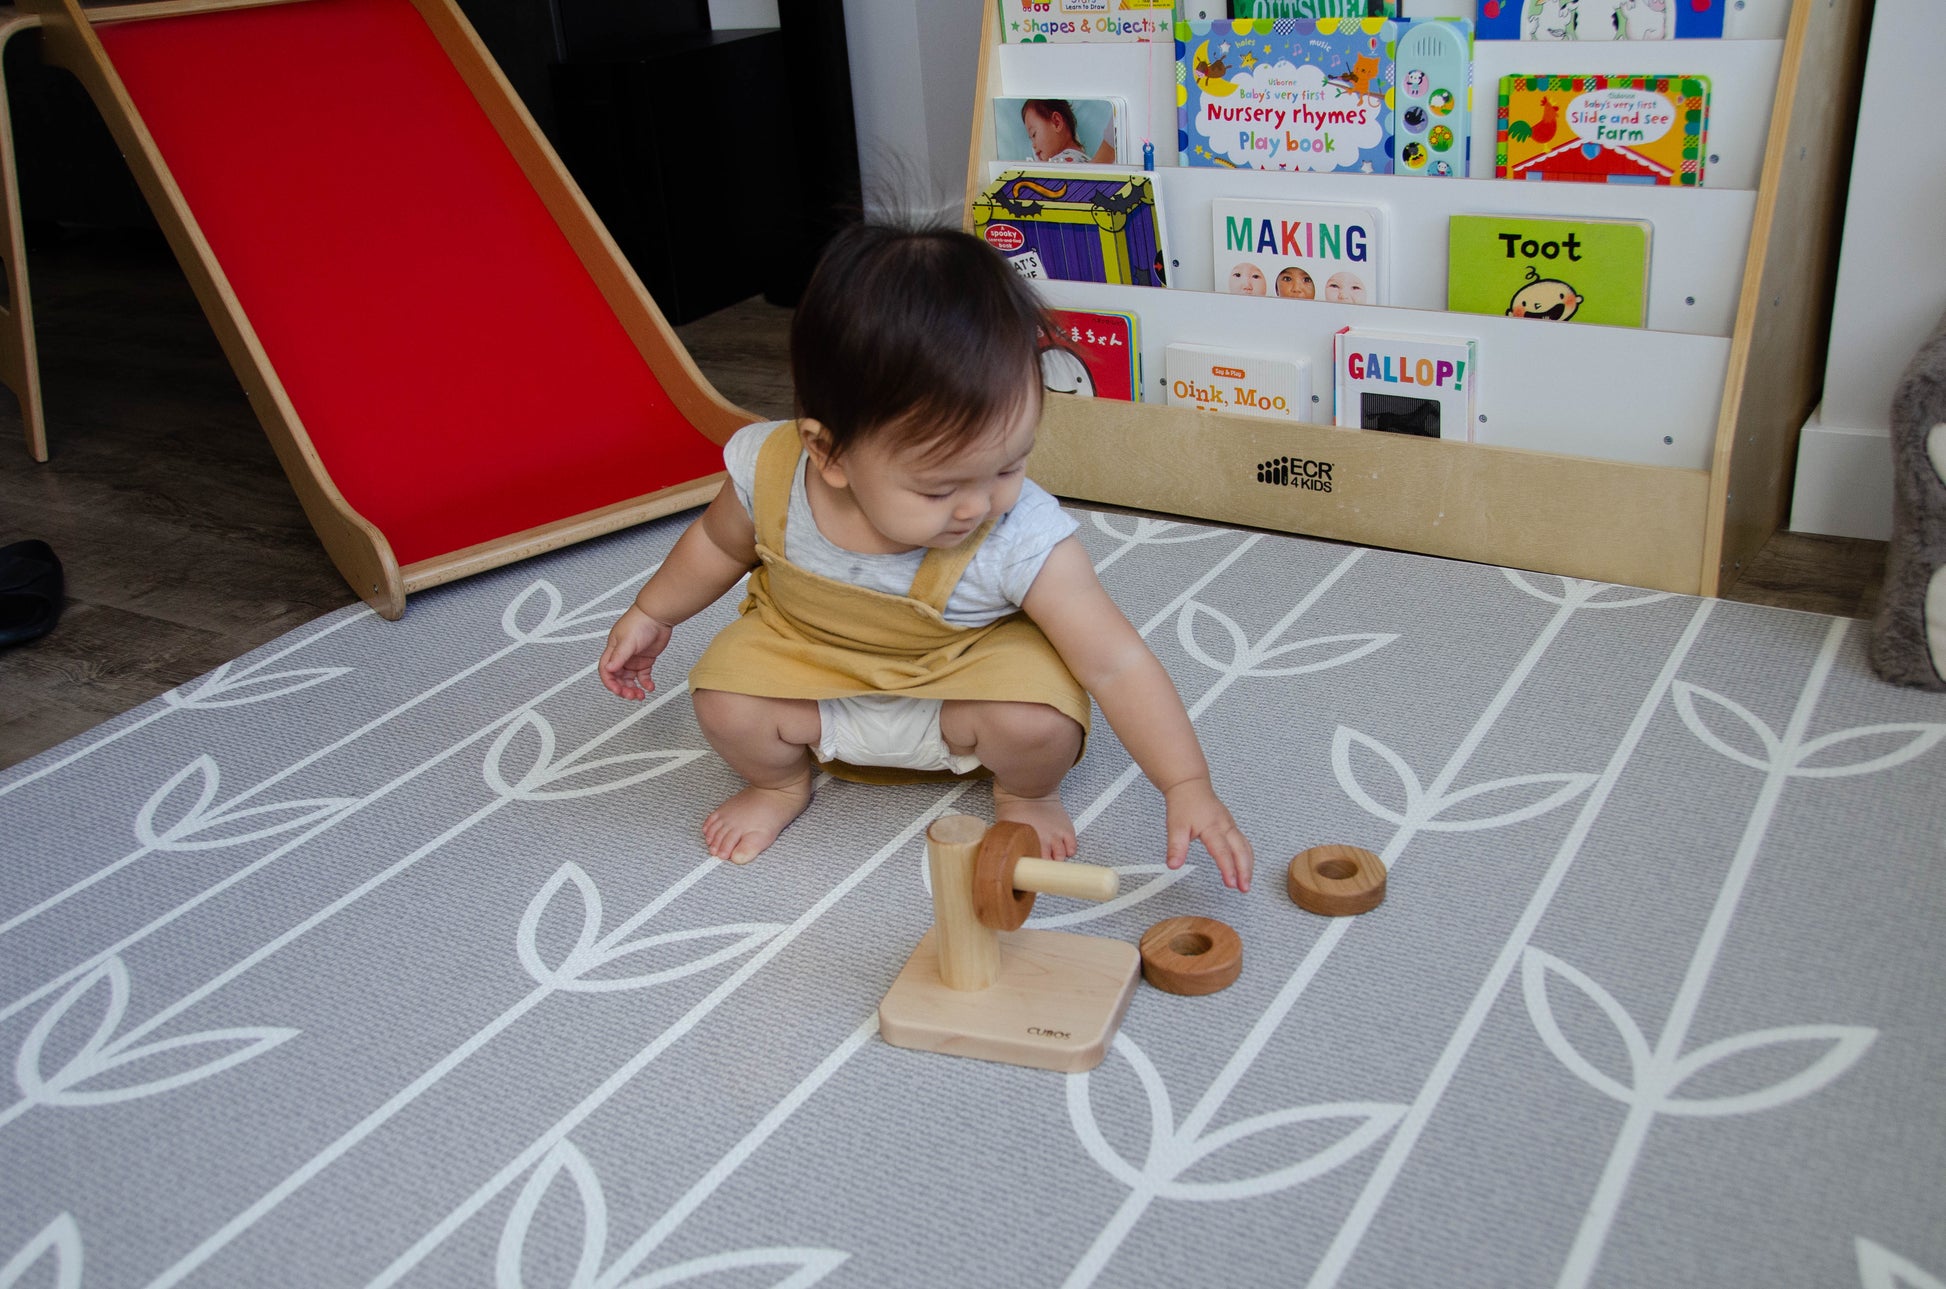 Endearing baby girl eagerly reaching out to grasp the second wooden ring for the Cubos Horizontal Dowel Rings Stacker, demonstrating her determination and developing fine motor skills as she continues her captivating playtime activity.